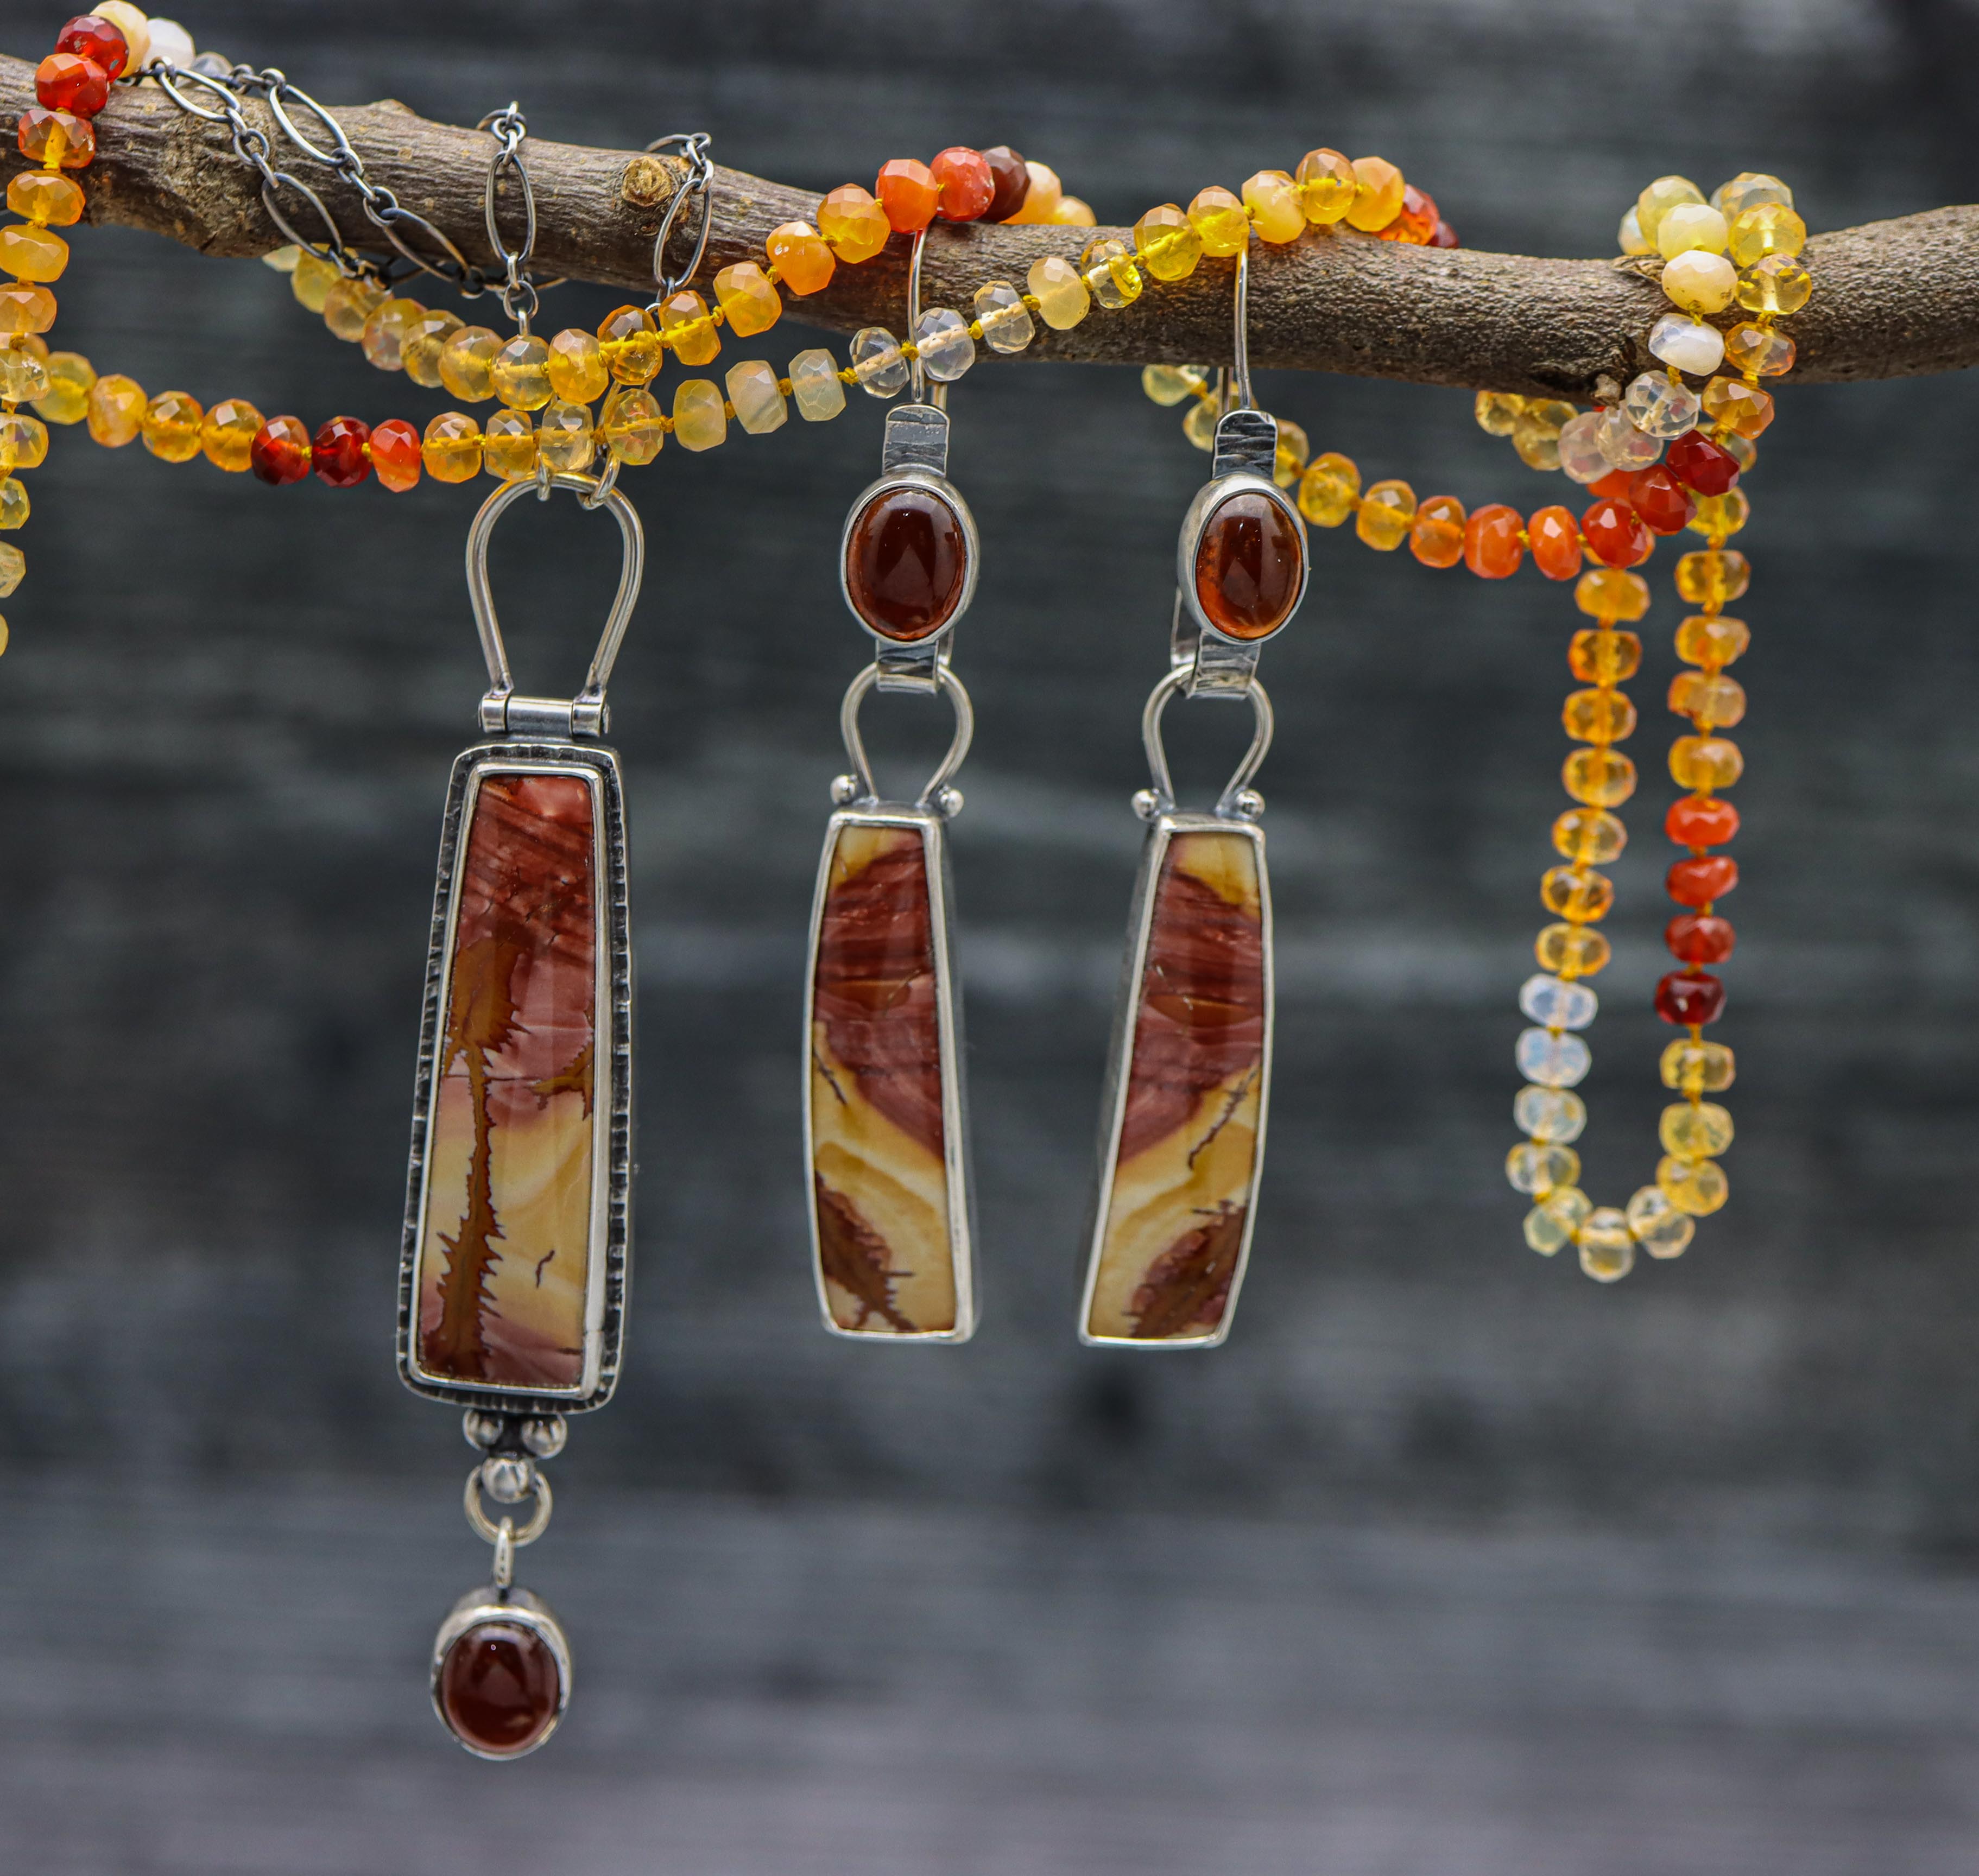 Red Falcon Jasper and Hessonite Garnet Pendant Sterling Silver One Of a Kind Gemstone Necklace